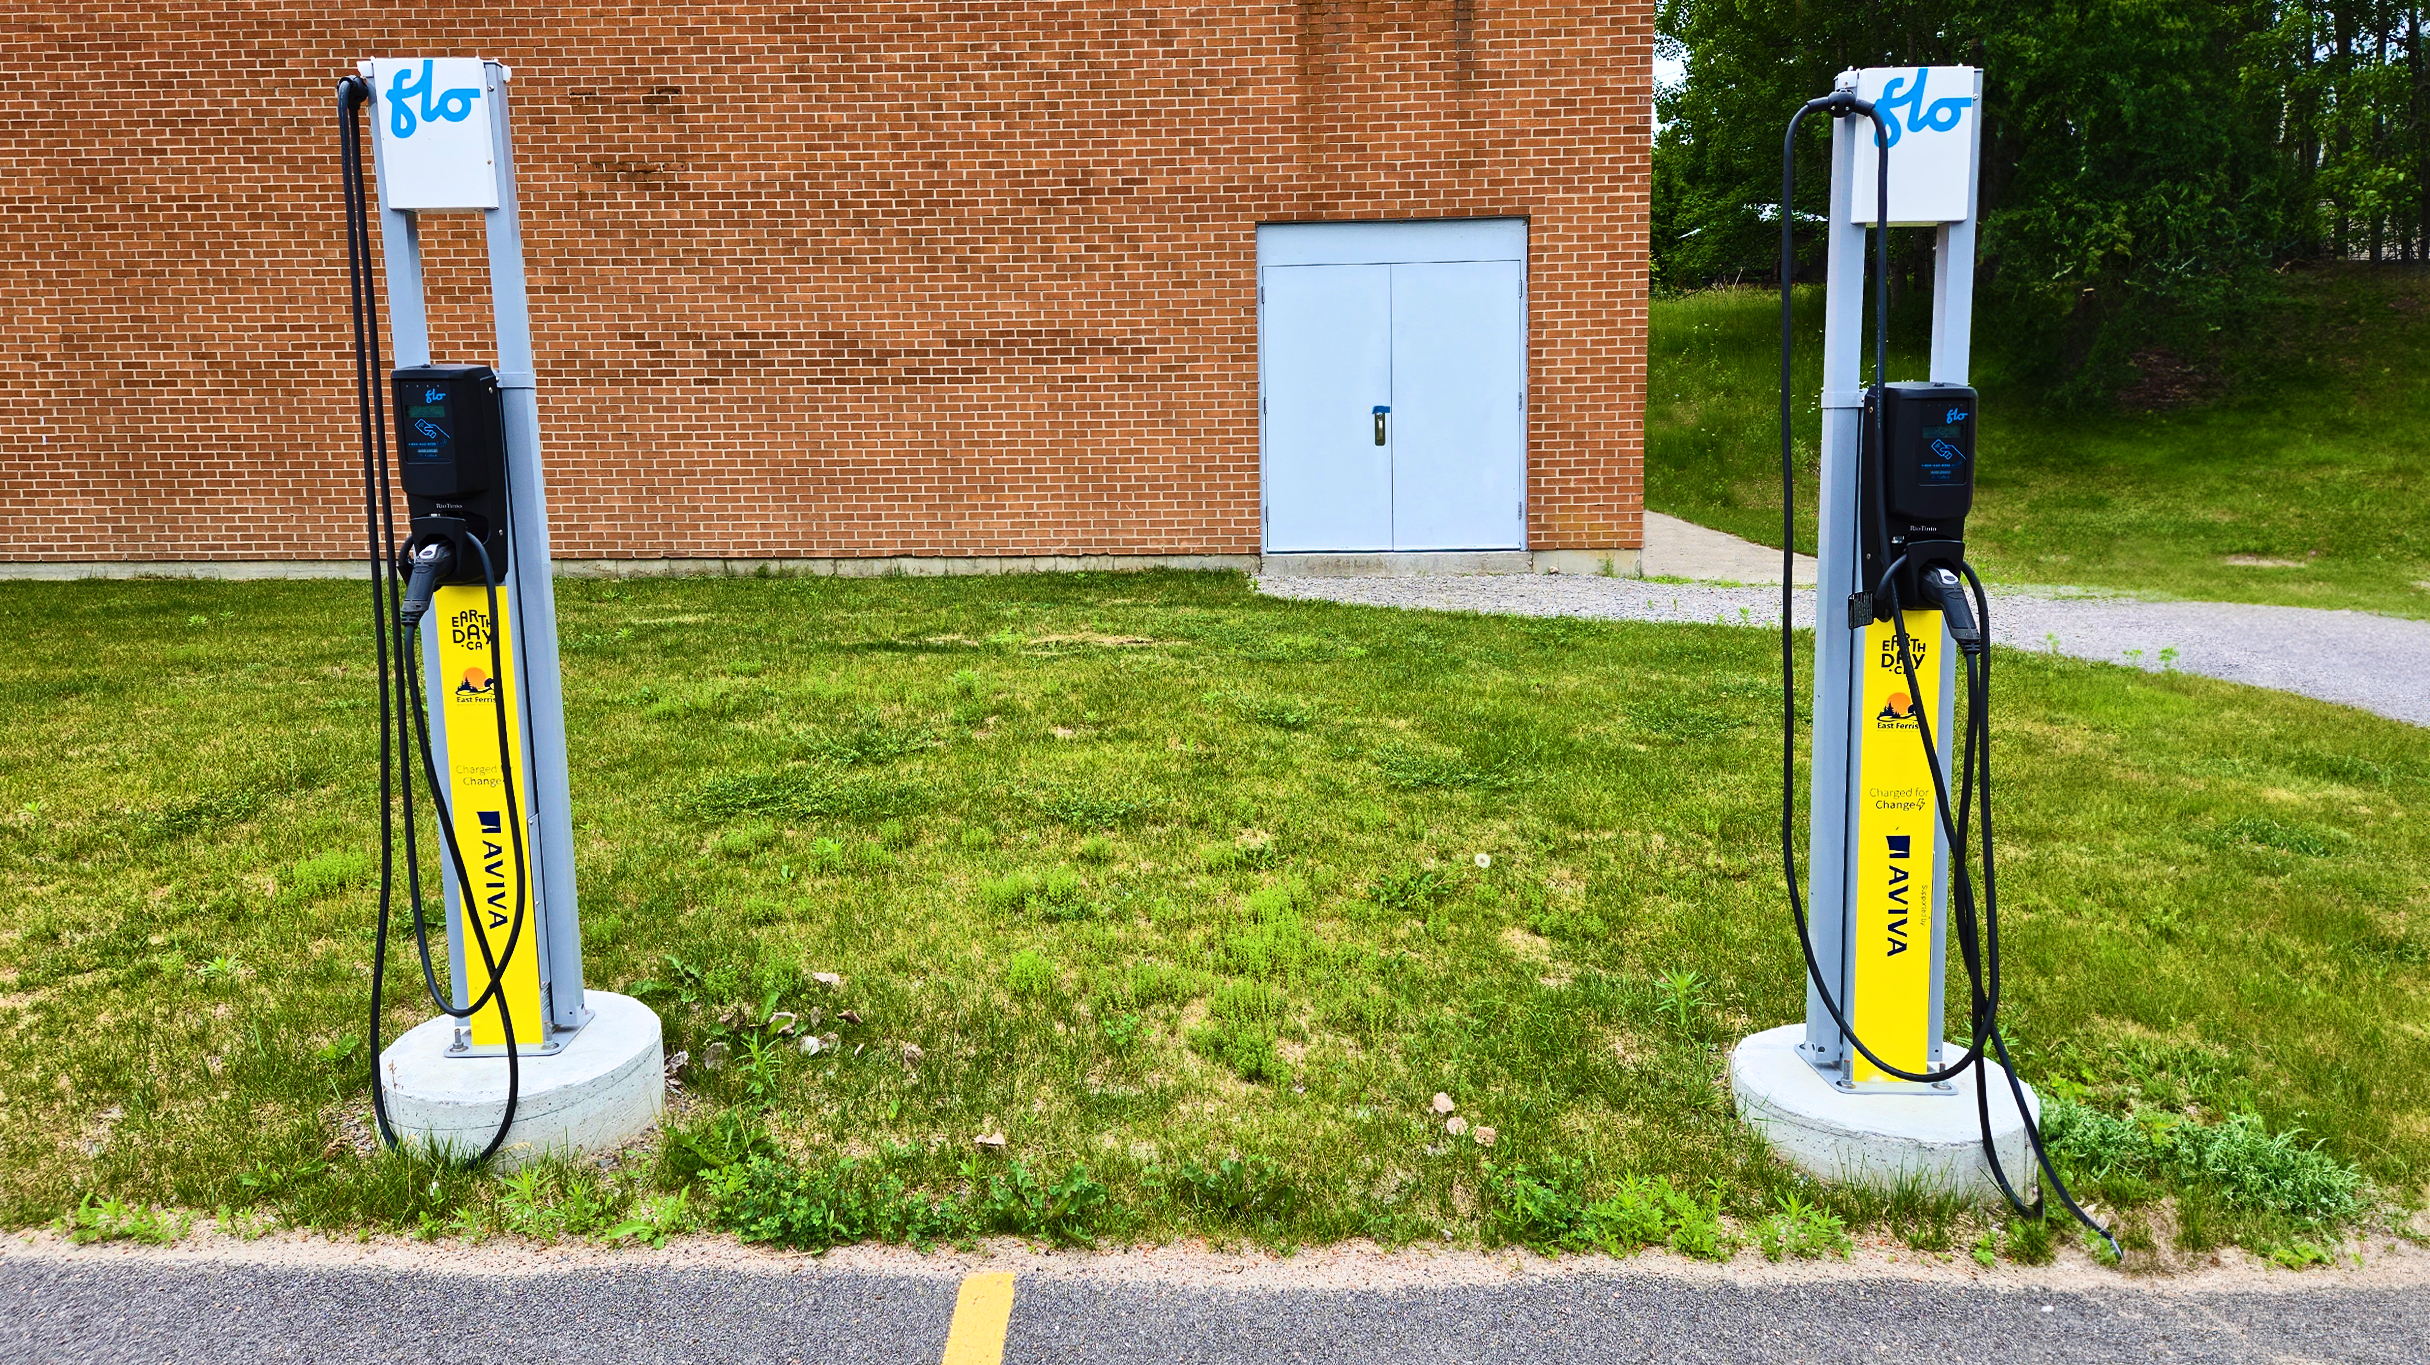 A Charged for Change electric vehicle charging station located in East Ferris, Ontario. Photo courtesy of the Municipality of East Ferris.